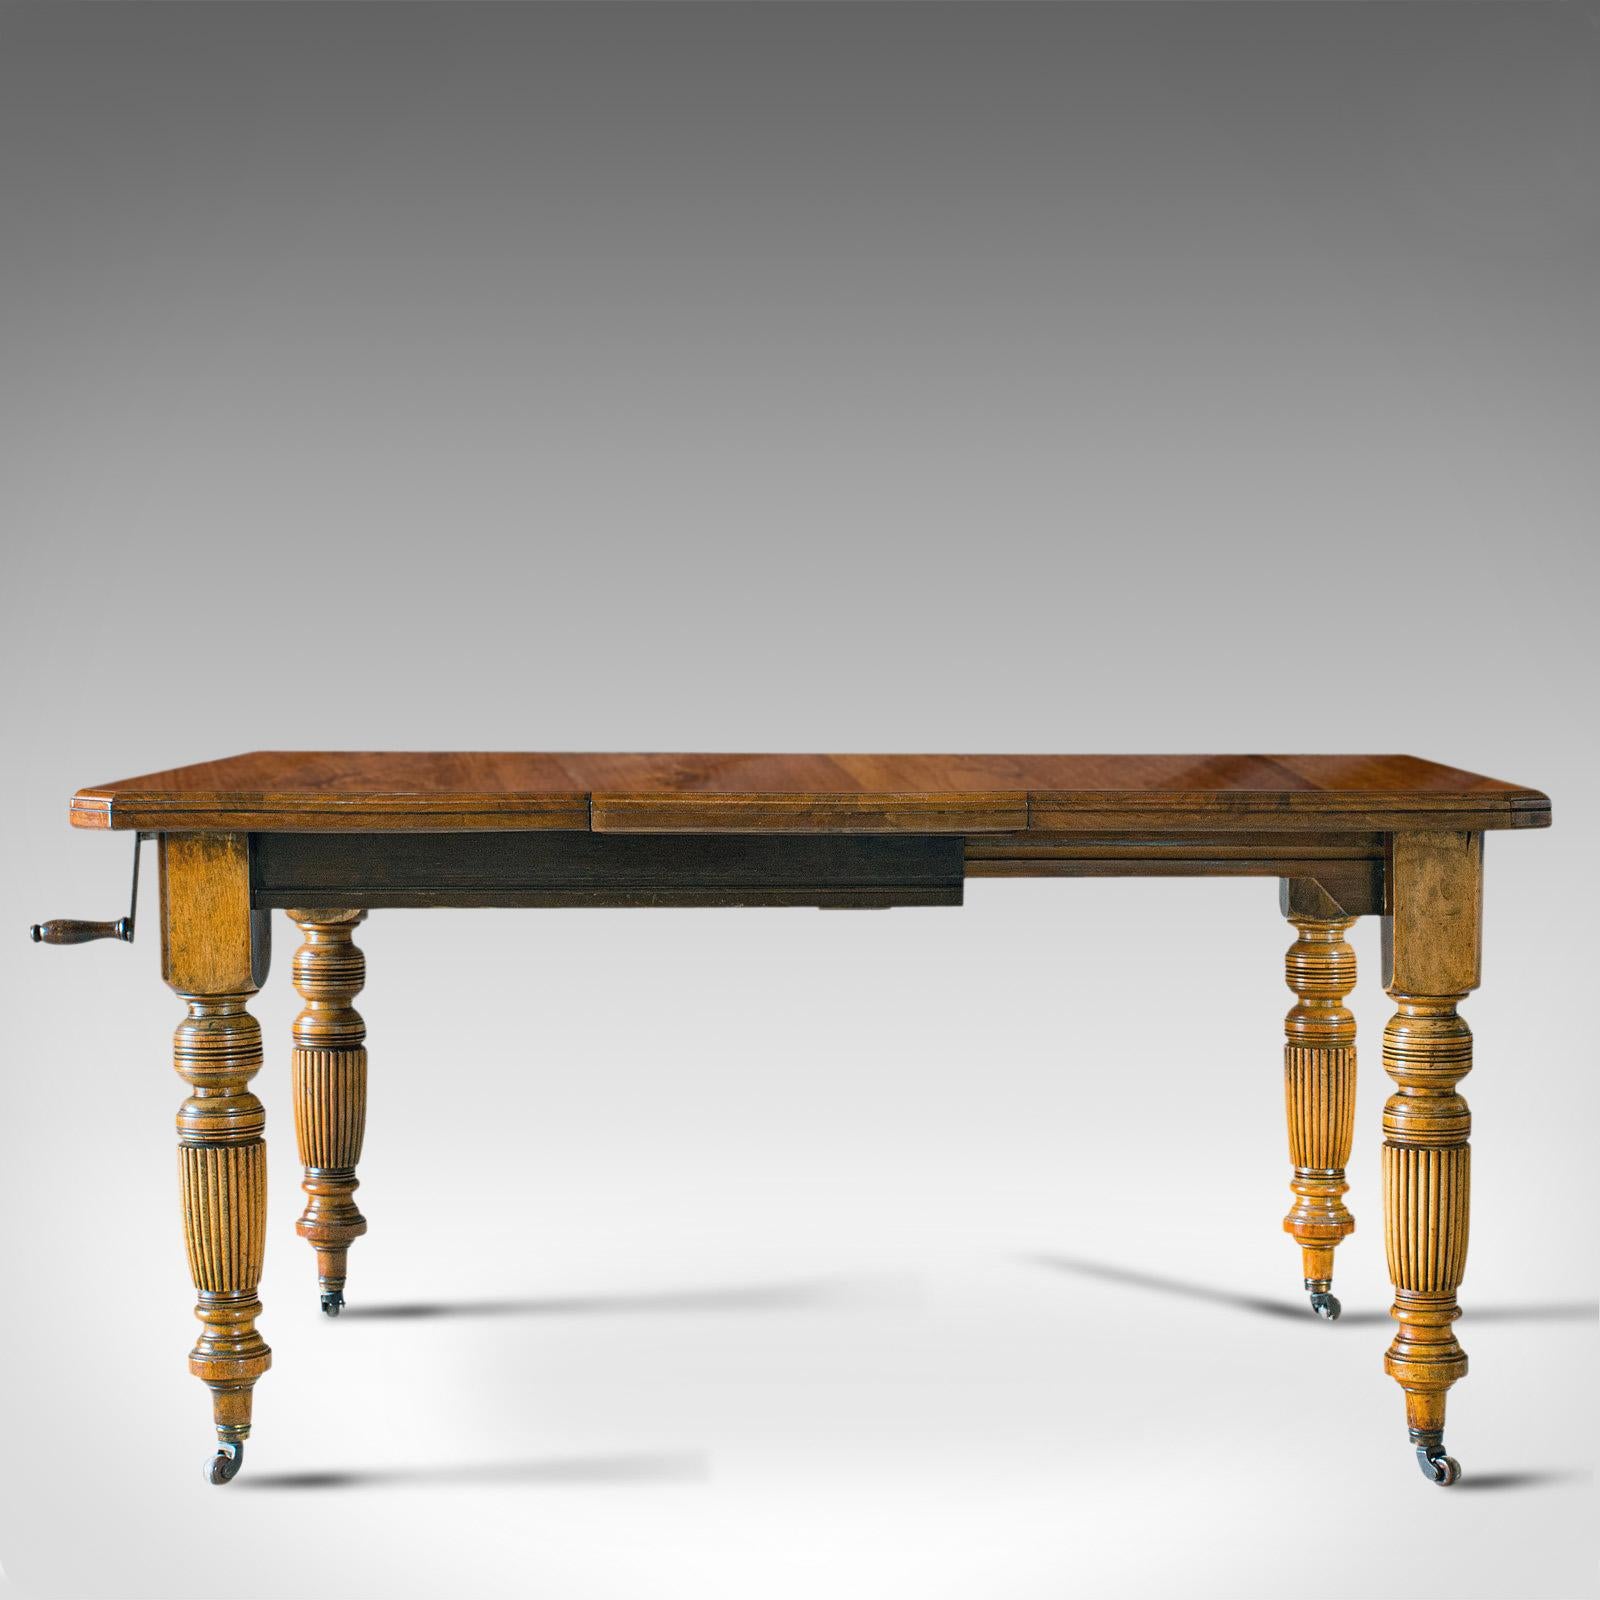 This is an antique extending dining table. An English, walnut table seating 4-6 people, dating to the Victorian period, circa 1890.

Appealing antique dining table
Displays a desirable aged patina
Walnut shows fine grain interest
Rich, light